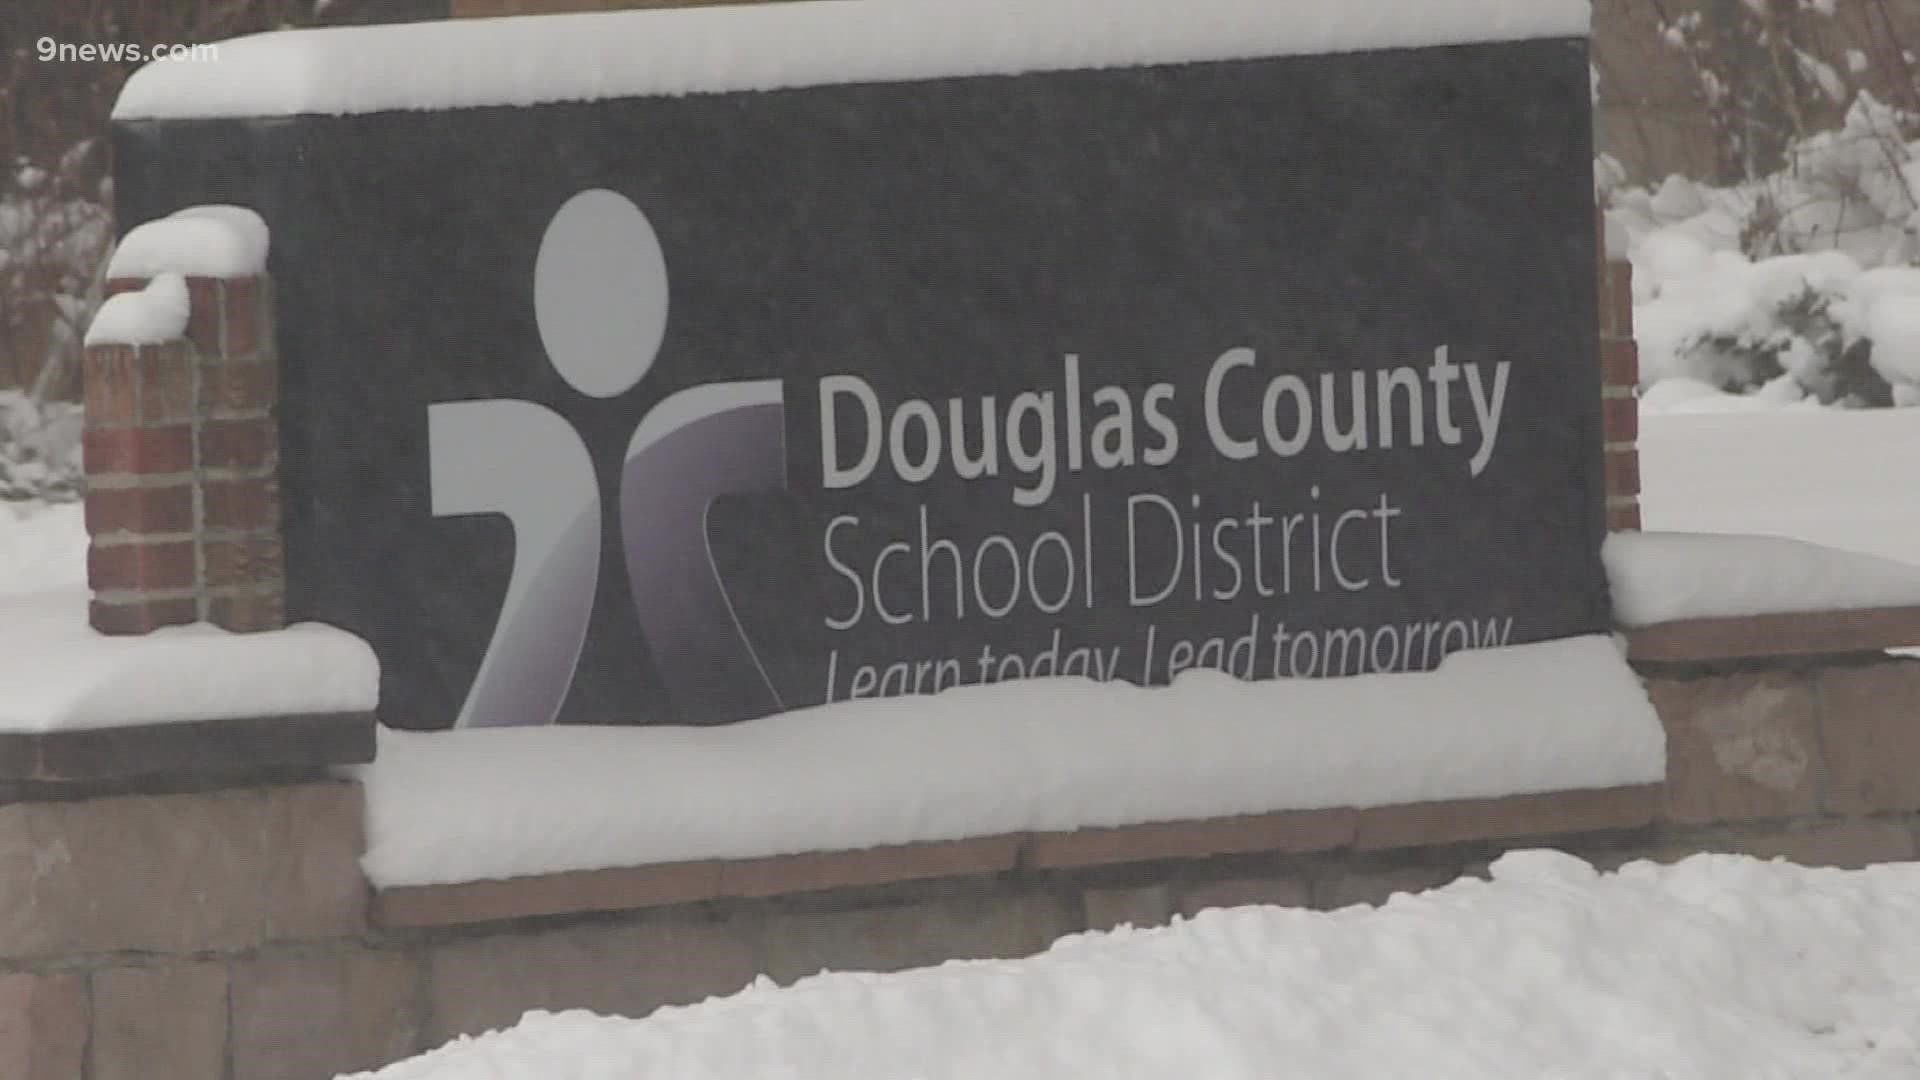 The call-out comes after the newly-elected conservative school board majority was accused of secretly meeting about forcing out the district superintendent.